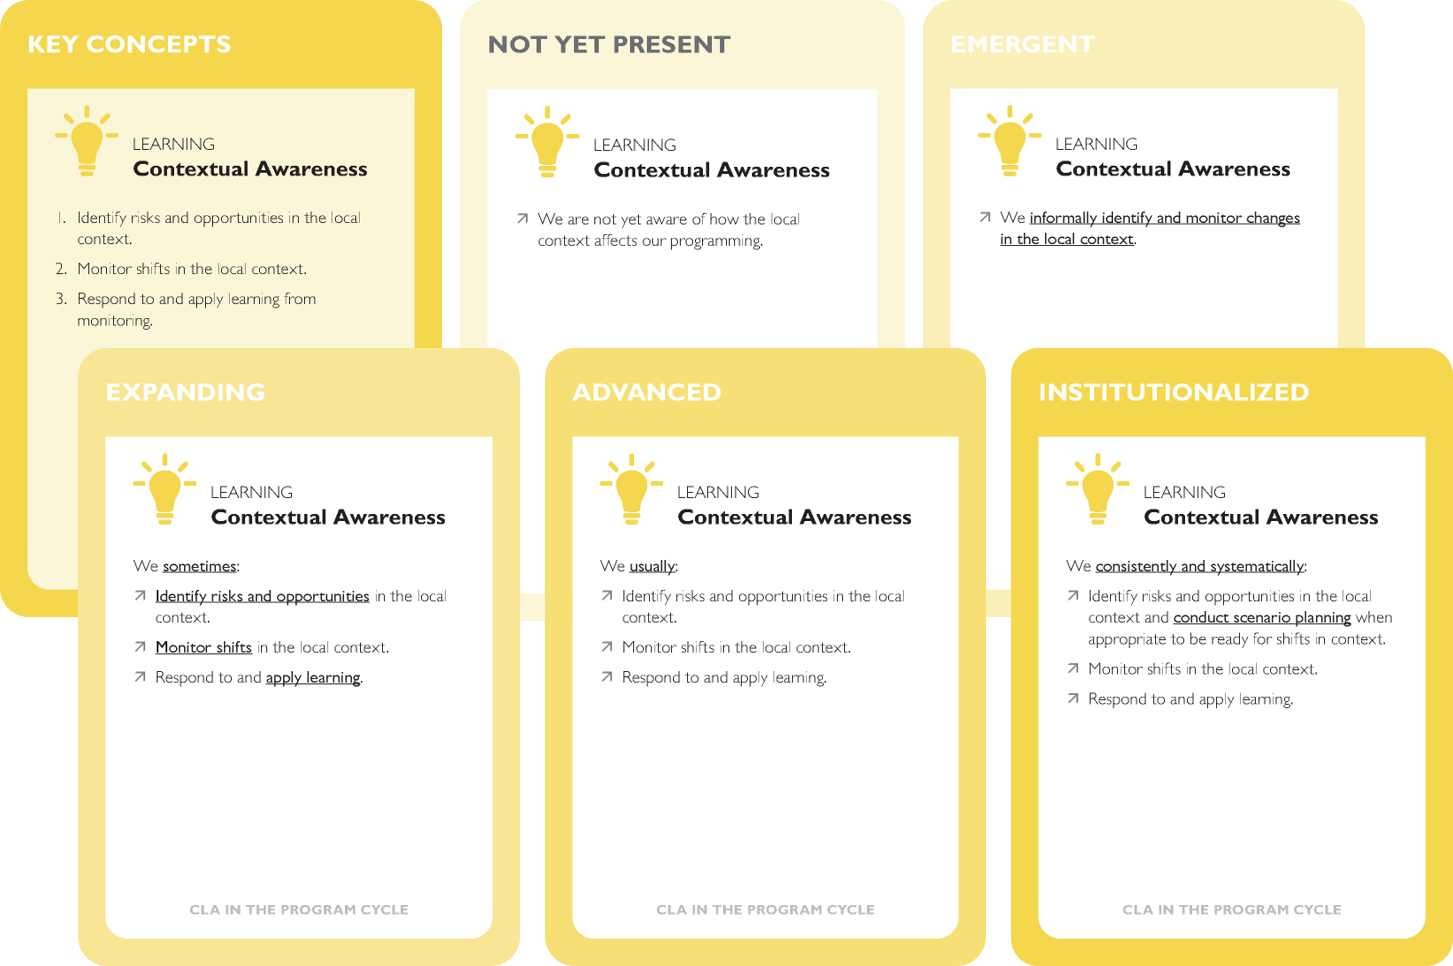 Example of Maturity Tool key concepts and spectrum cards for new Learning subcomponent of Contextual Awareness (updated from Scenario Planning)